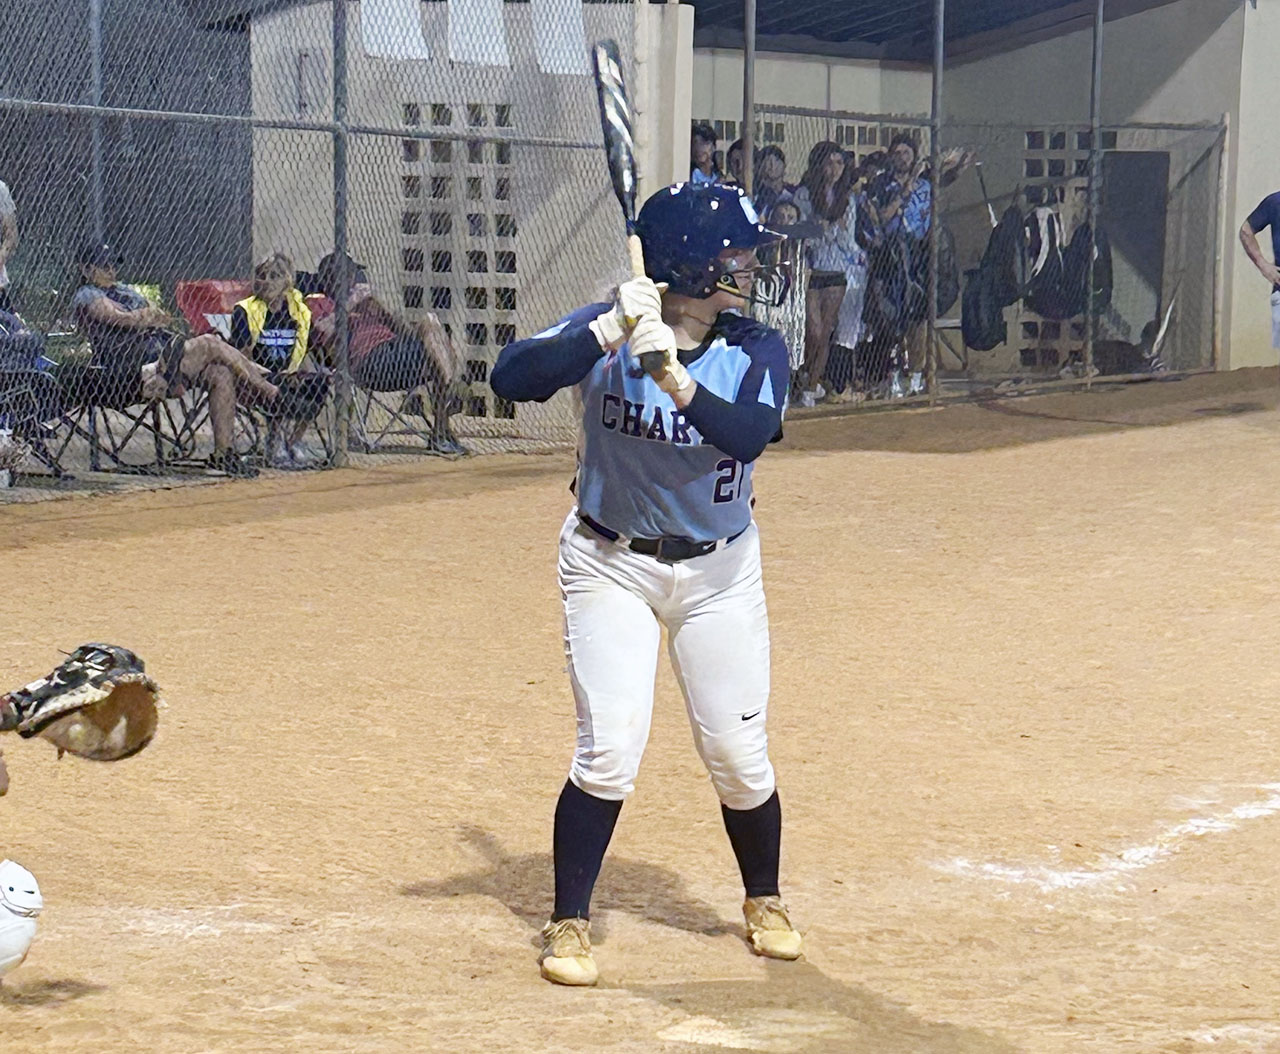 Catcher Stephanie Basso smacked a solo home run in the second inning in Coral Springs Charters' 12-2 win on Monday.